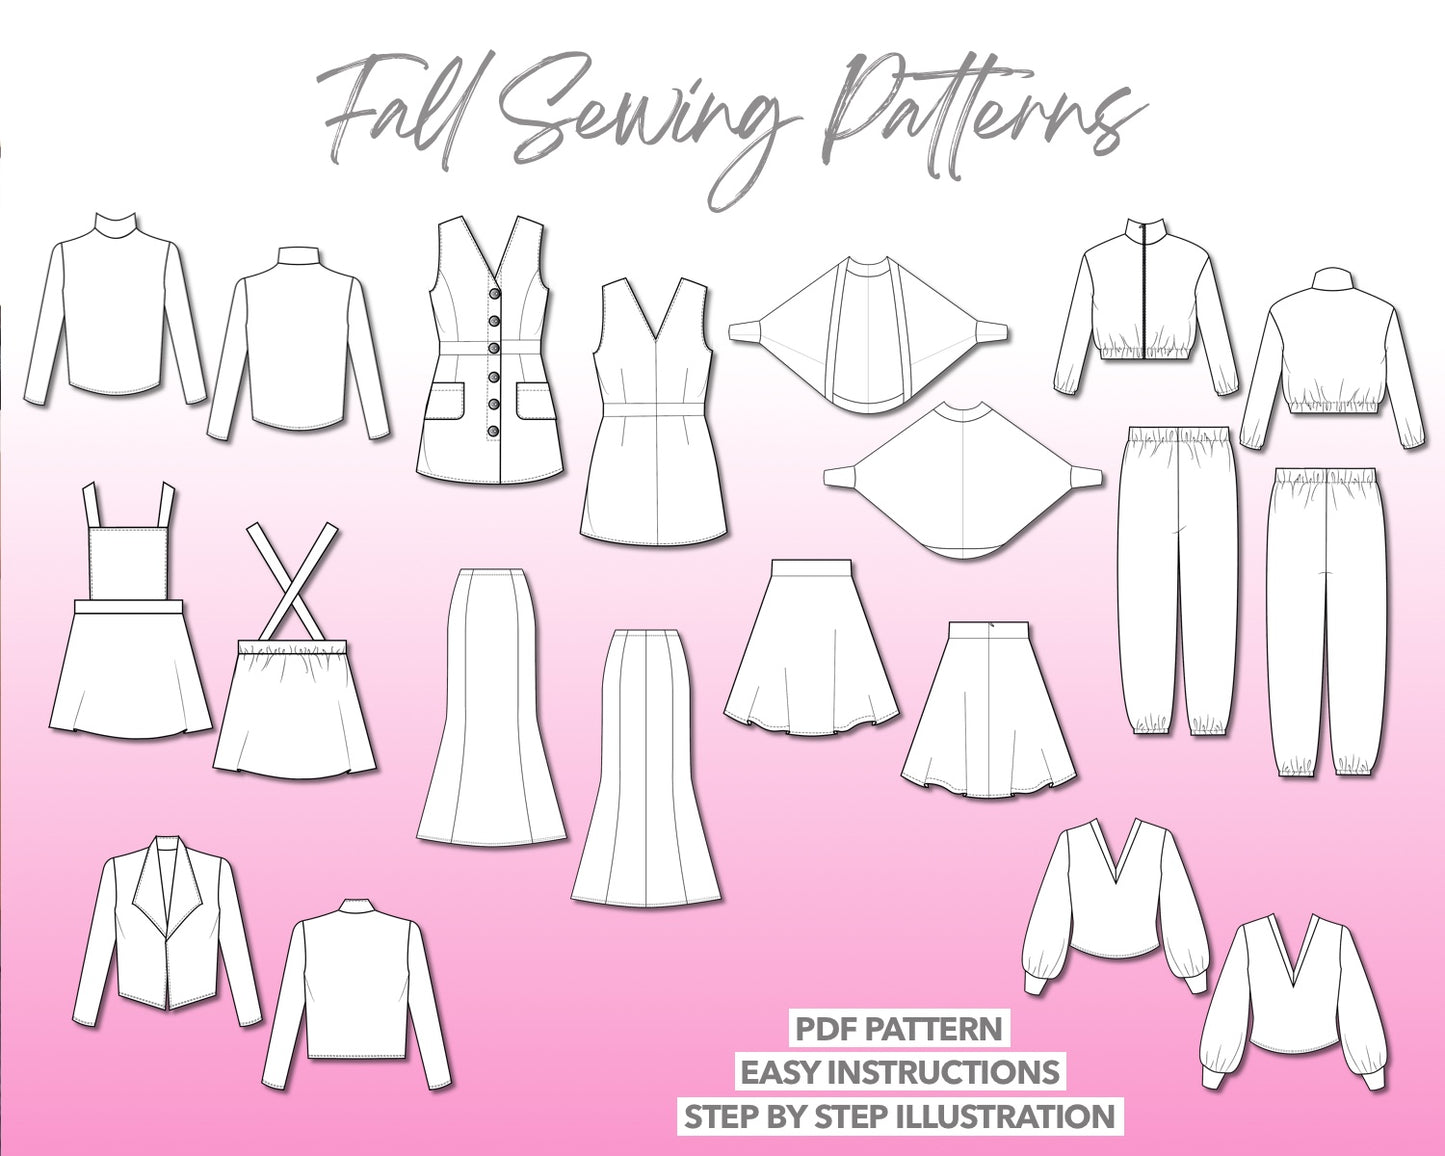 Fall sewing pattern pdf with easy instructions and step by step illustrations.